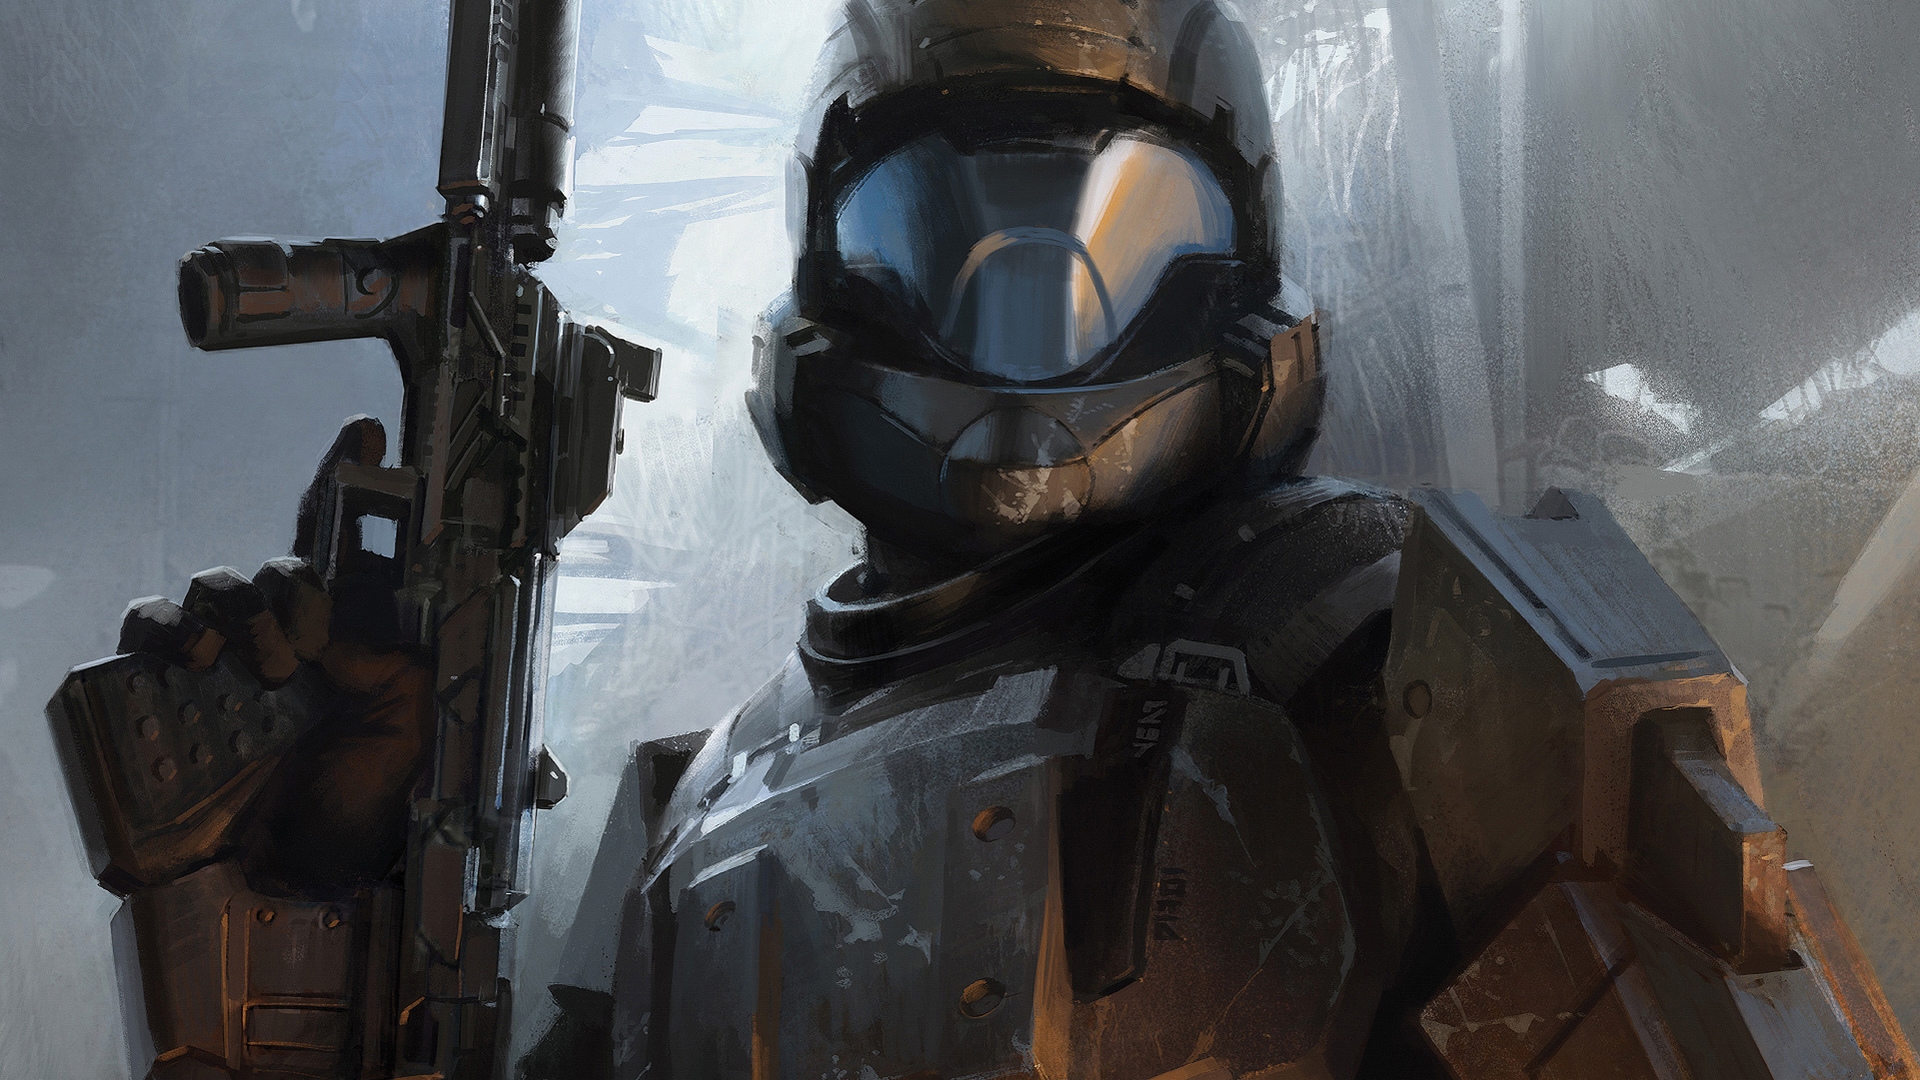 Halo 3 ODST Video Game Art Halo Video Game Characters Helmet Video Games Gun Armor 1920x1080